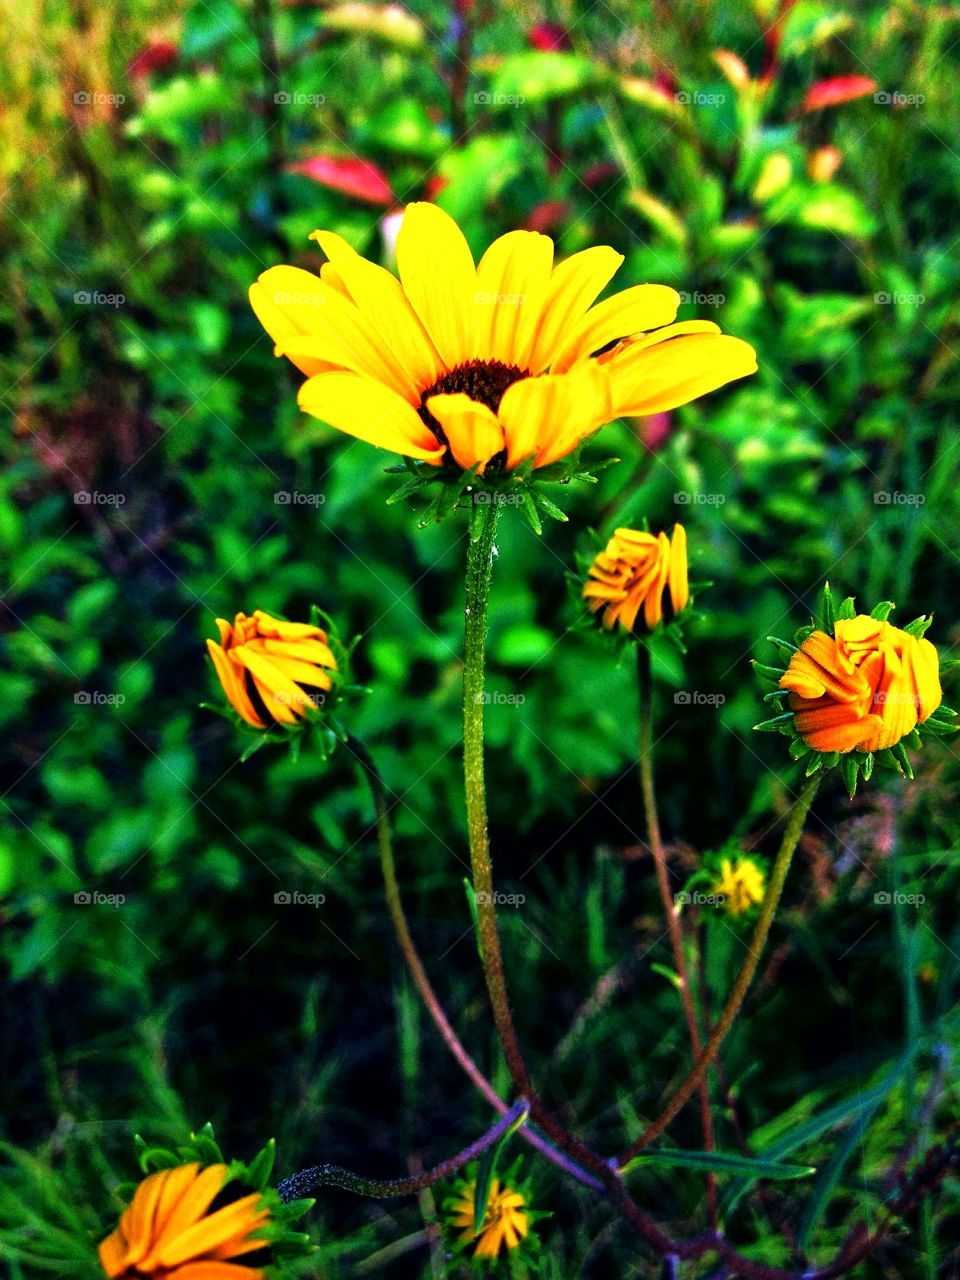 A beautiful yellow flower growing wild in rural White County, central Arkansas